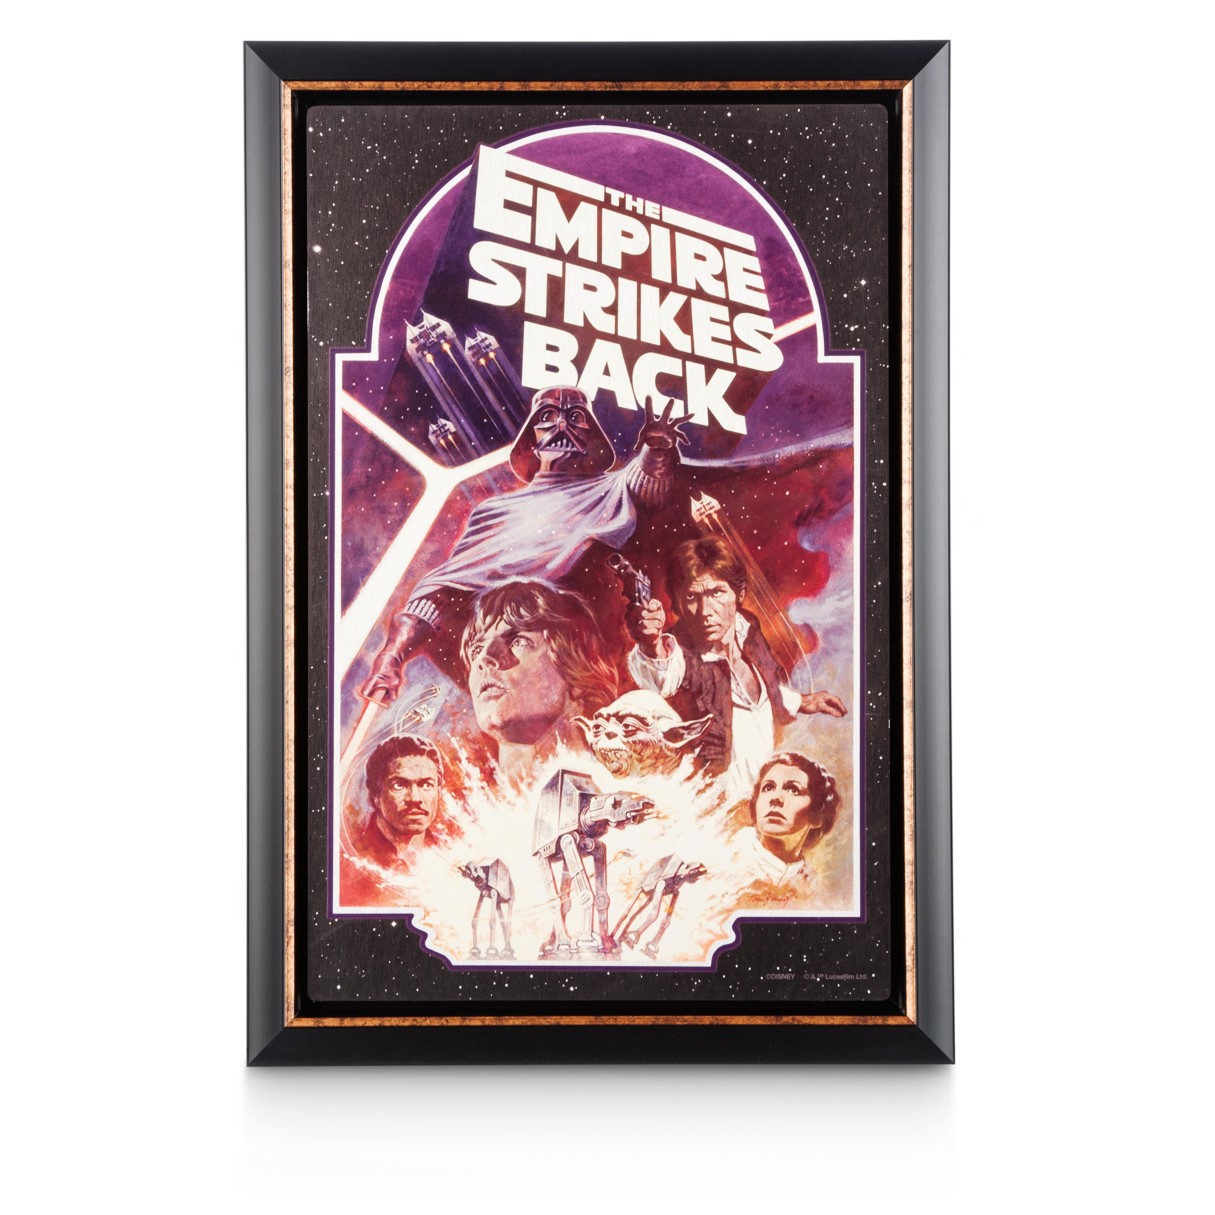 Star Wars: The Empire Strikes Back Movie Poster Reproduction Metal Print – Framed